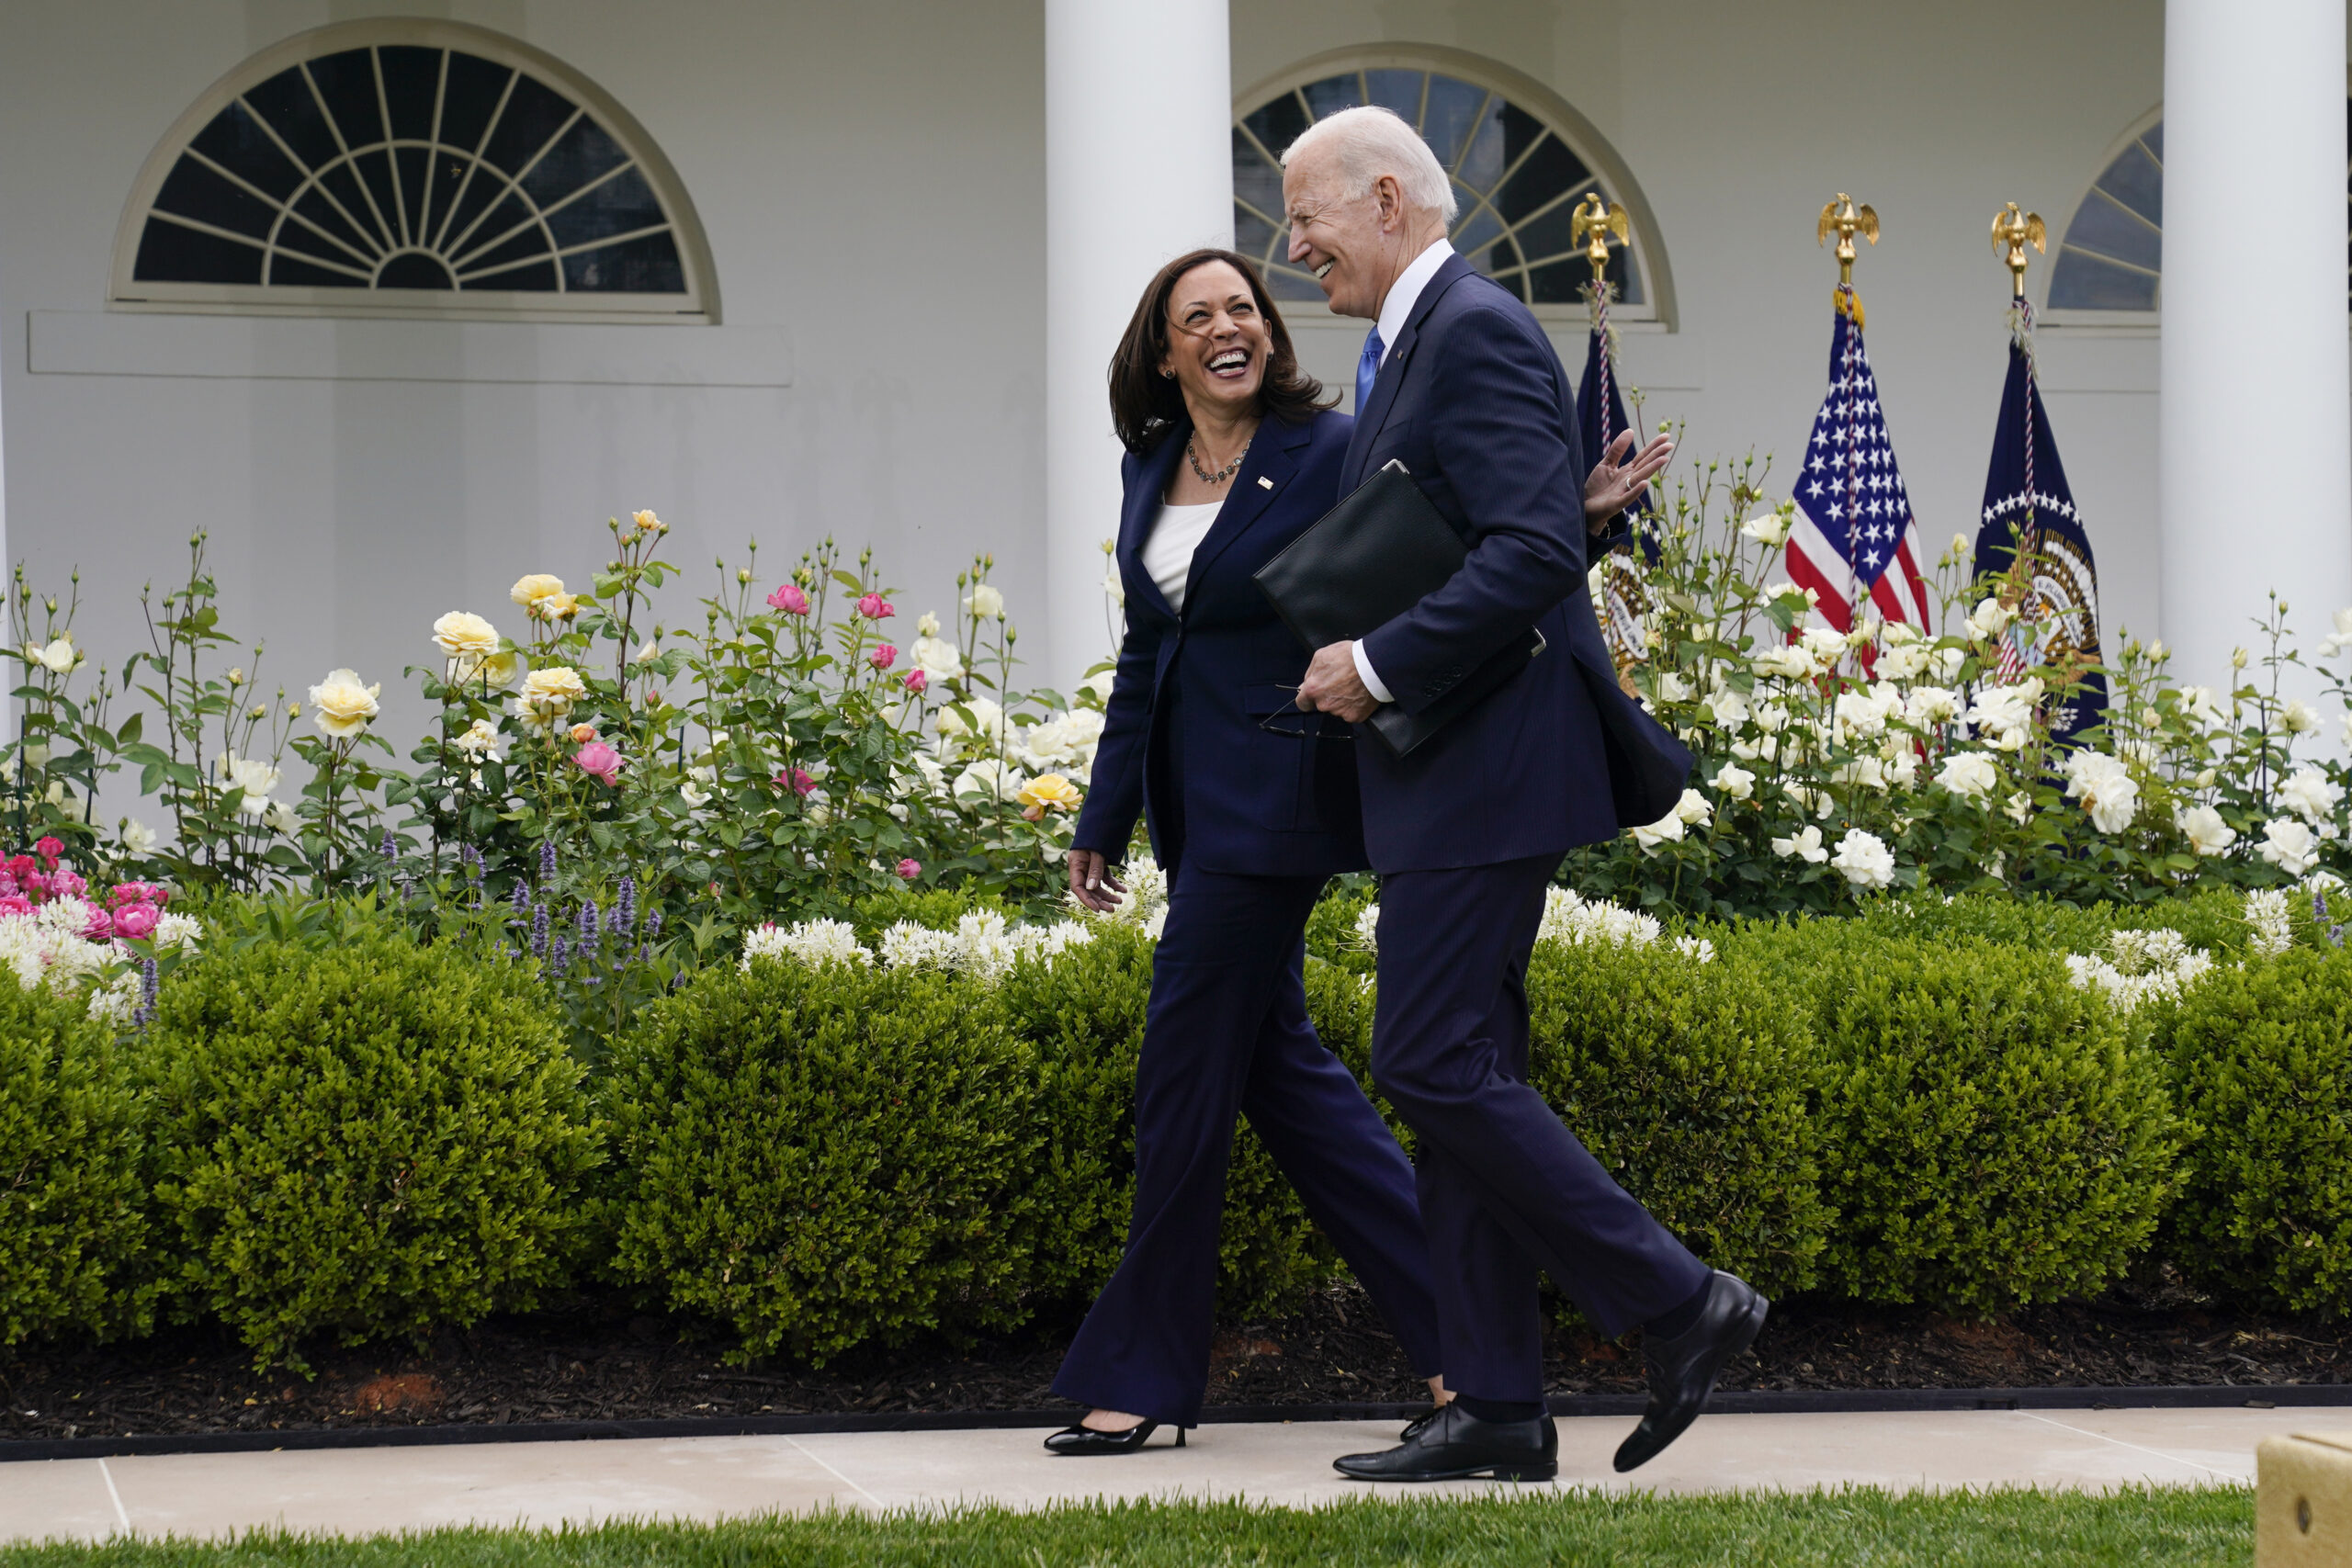 FILE - President Joe Biden walks with Vice President Kamala Harris after speaking on updated guidance on face mask mandates and COVID-19 response, in the Rose Garden of the White House, May 13, 2021, in Washington. Harris is capping off a controversial first year in office, creating history as the first woman of color in her position while fending off criticism and complaints over her focus and agenda. While she’s sought to make the office her own, Harris has struggled at times with the constraints of a global pandemic and the realities of a role focused squarely on promoting the president.